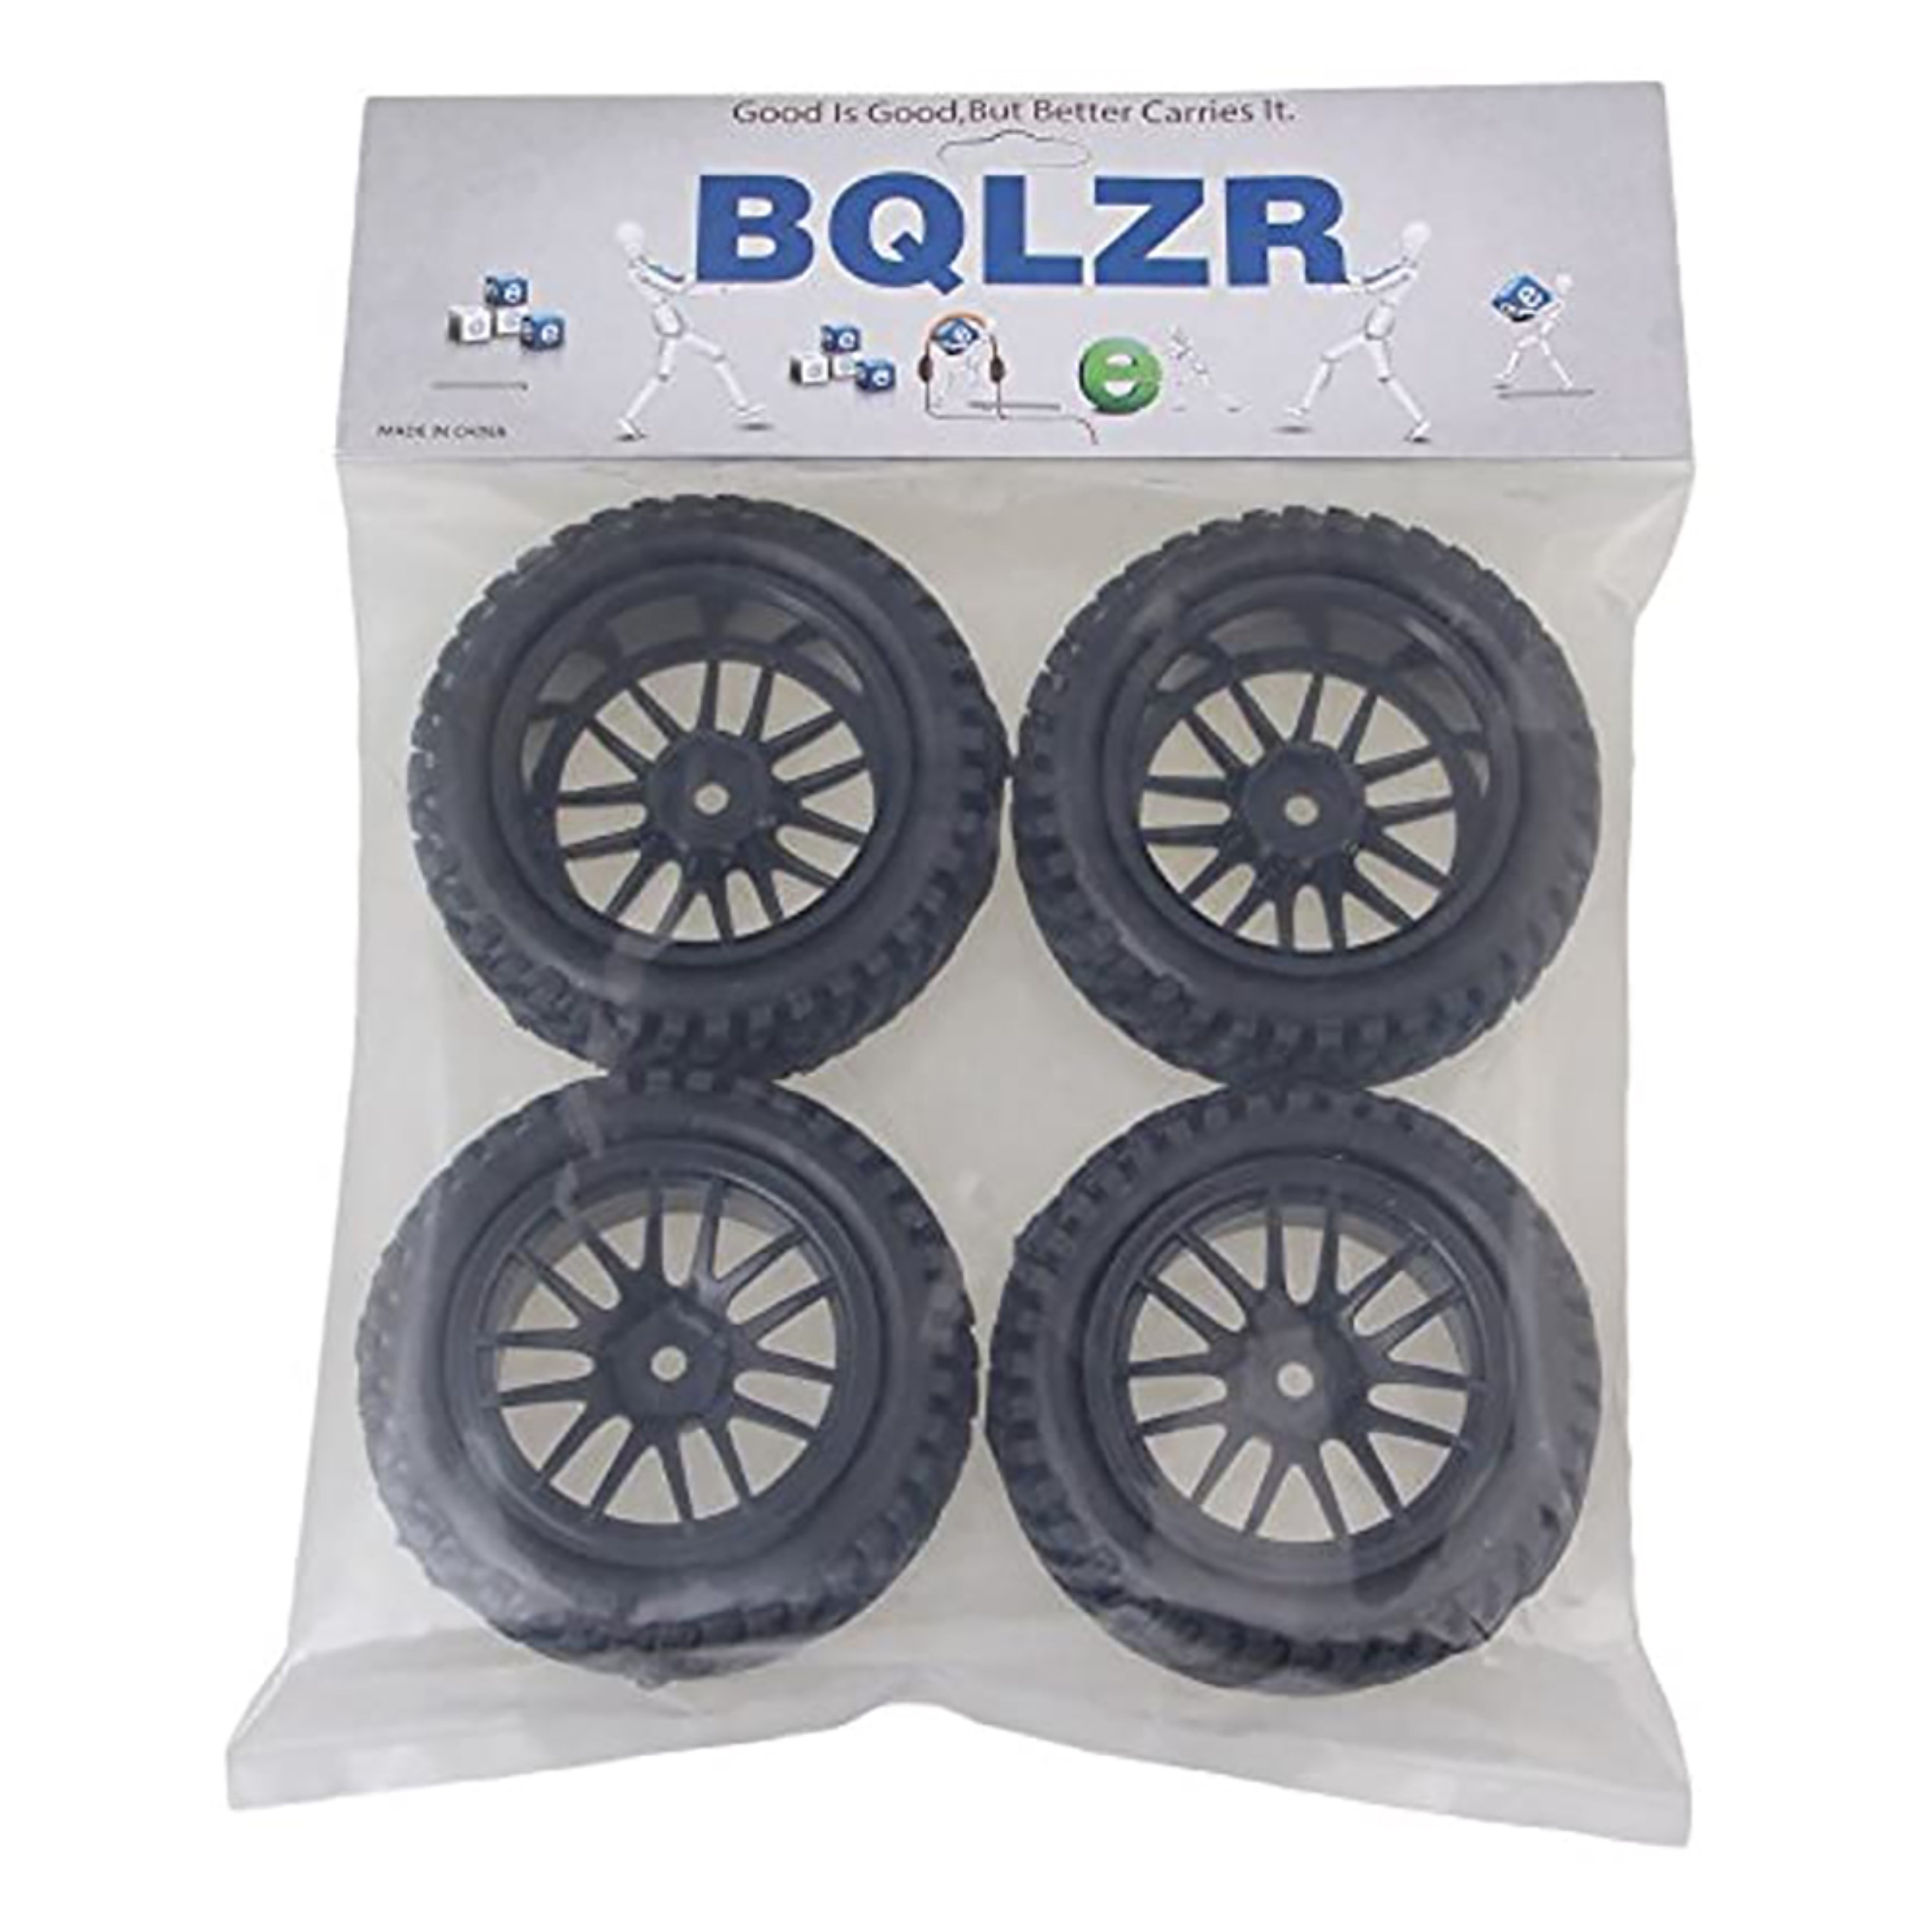 BQLZR RC 1:10 Wheel Rim With Rubber Tire For Off-Road Vehicle Black ‎15.24  x 8.38 x 6.35cm ‎N15103 4-Piece | Wholesale | Tradeling